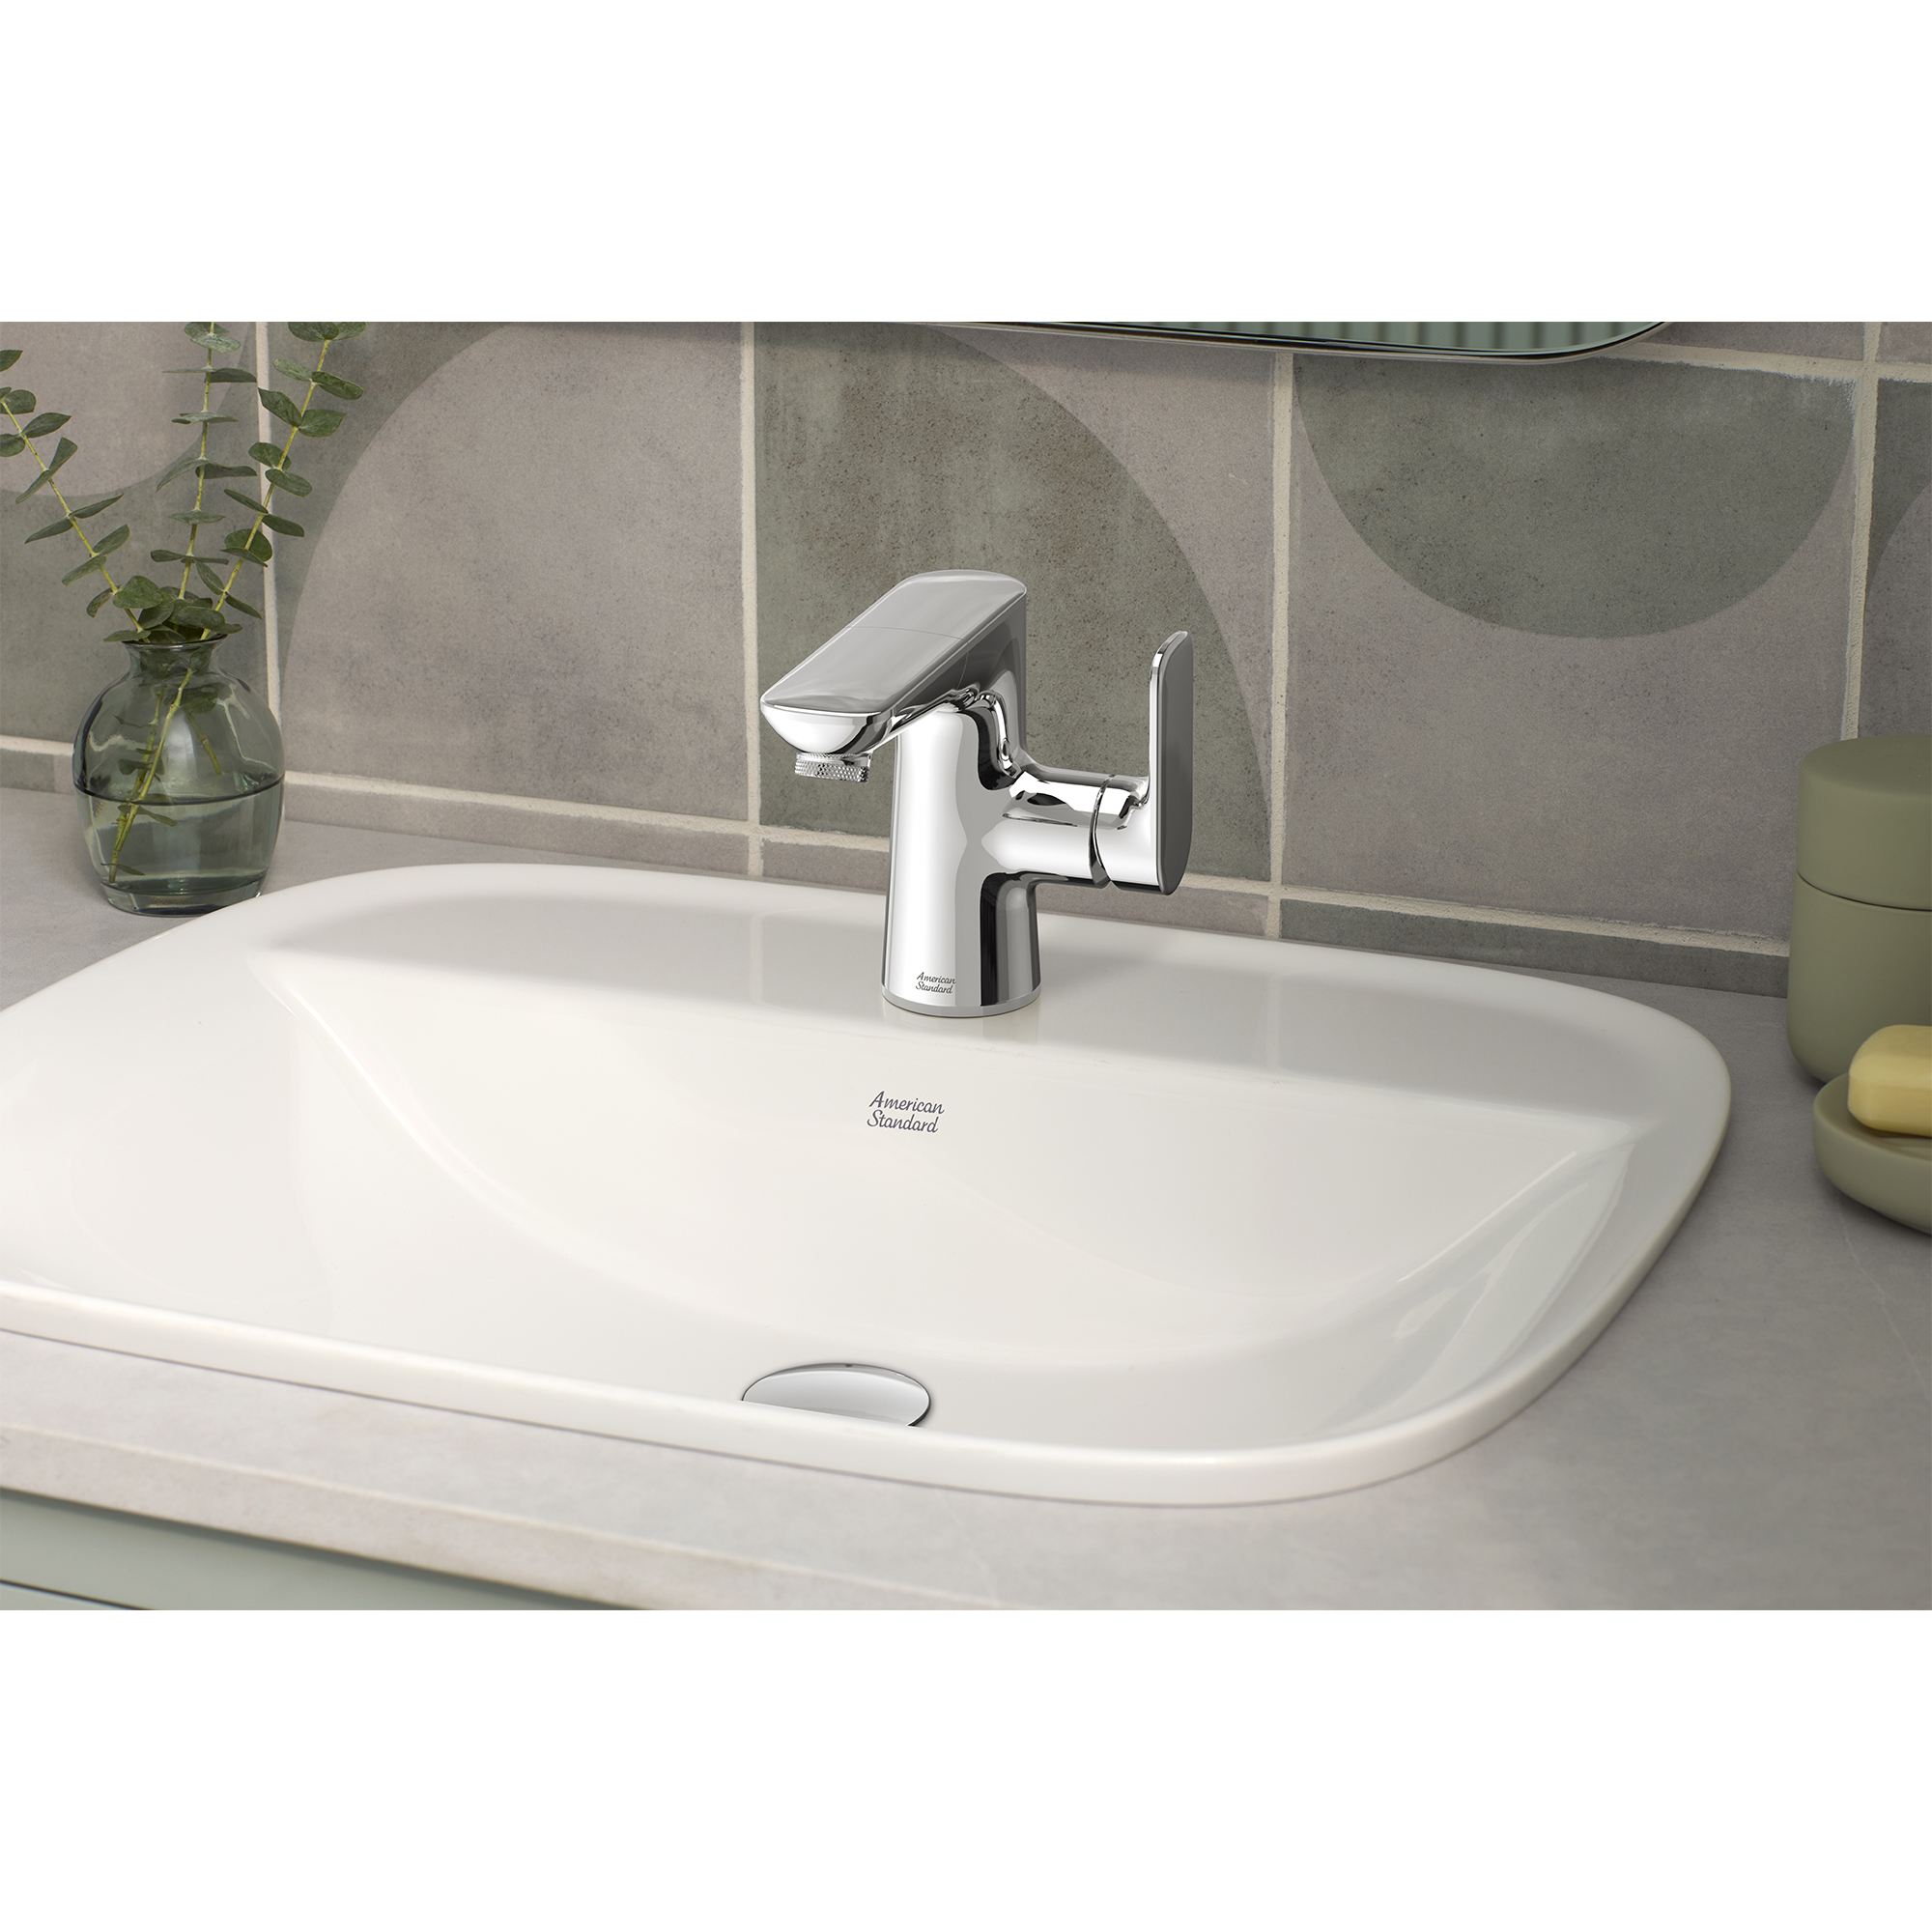 Aspirations® Single-Handle Pull-Out Bathroom Faucet 1.2 gpm/ 4.5 L/min With Lever Handle